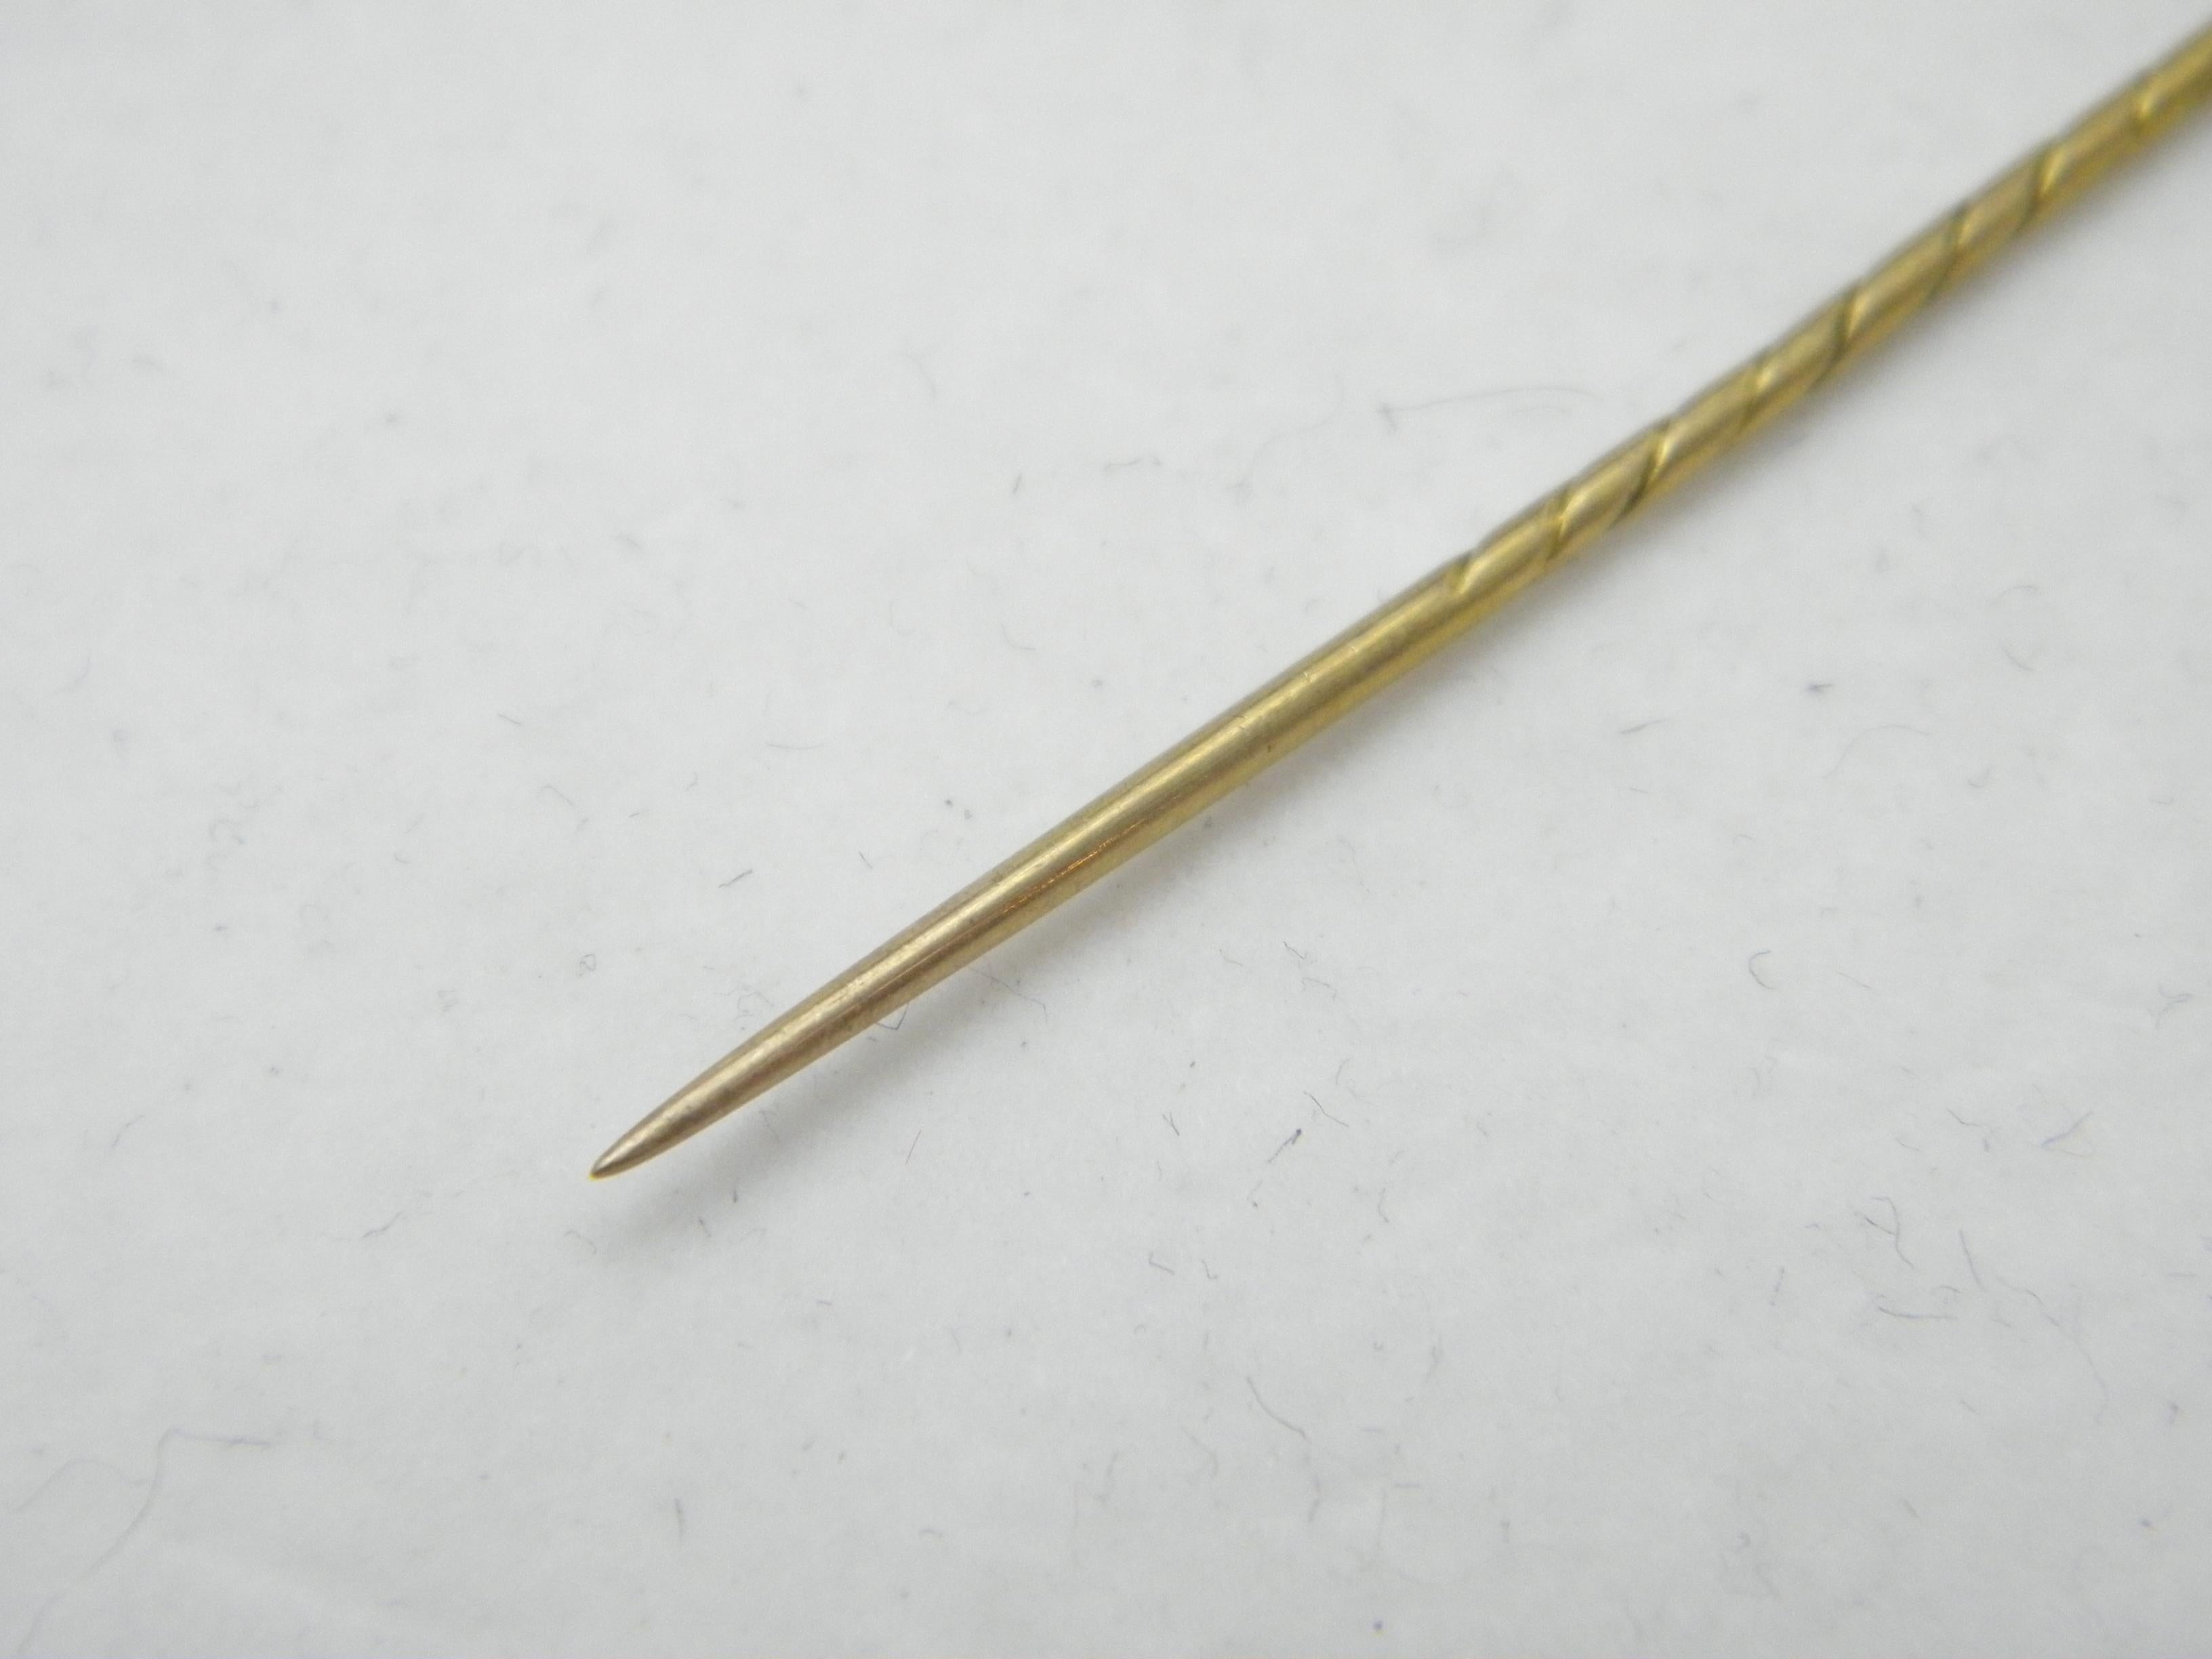 Antique 15ct Gold Diamond Stock Pin Brooch c1880 Heavy 625 Purity Tie Lapel Hat In Good Condition For Sale In Camelford, GB